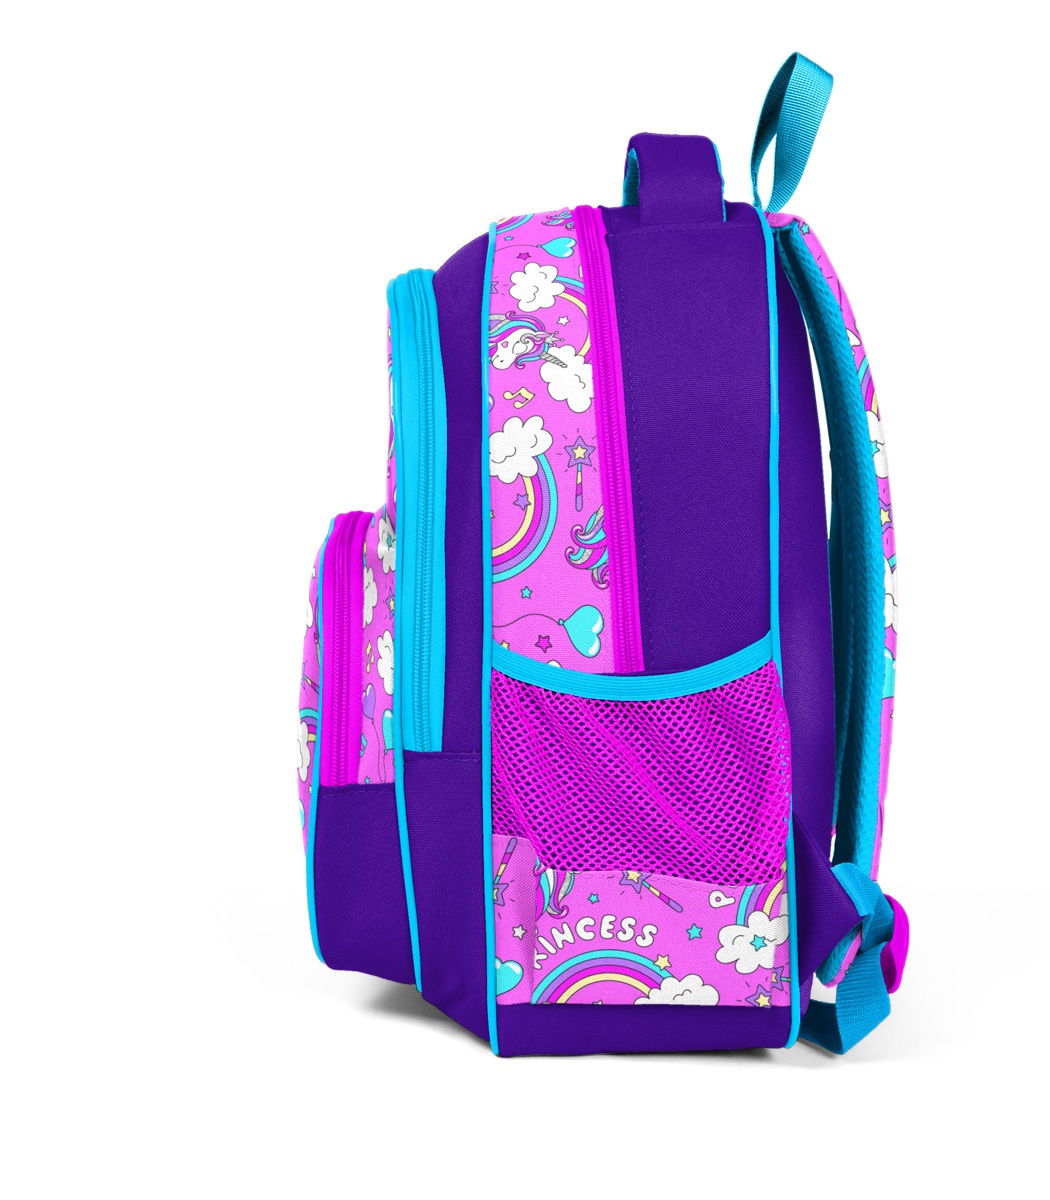 Coral High Kids Three Compartment School Backpack - Purple Light Pink Unicorn Patterned